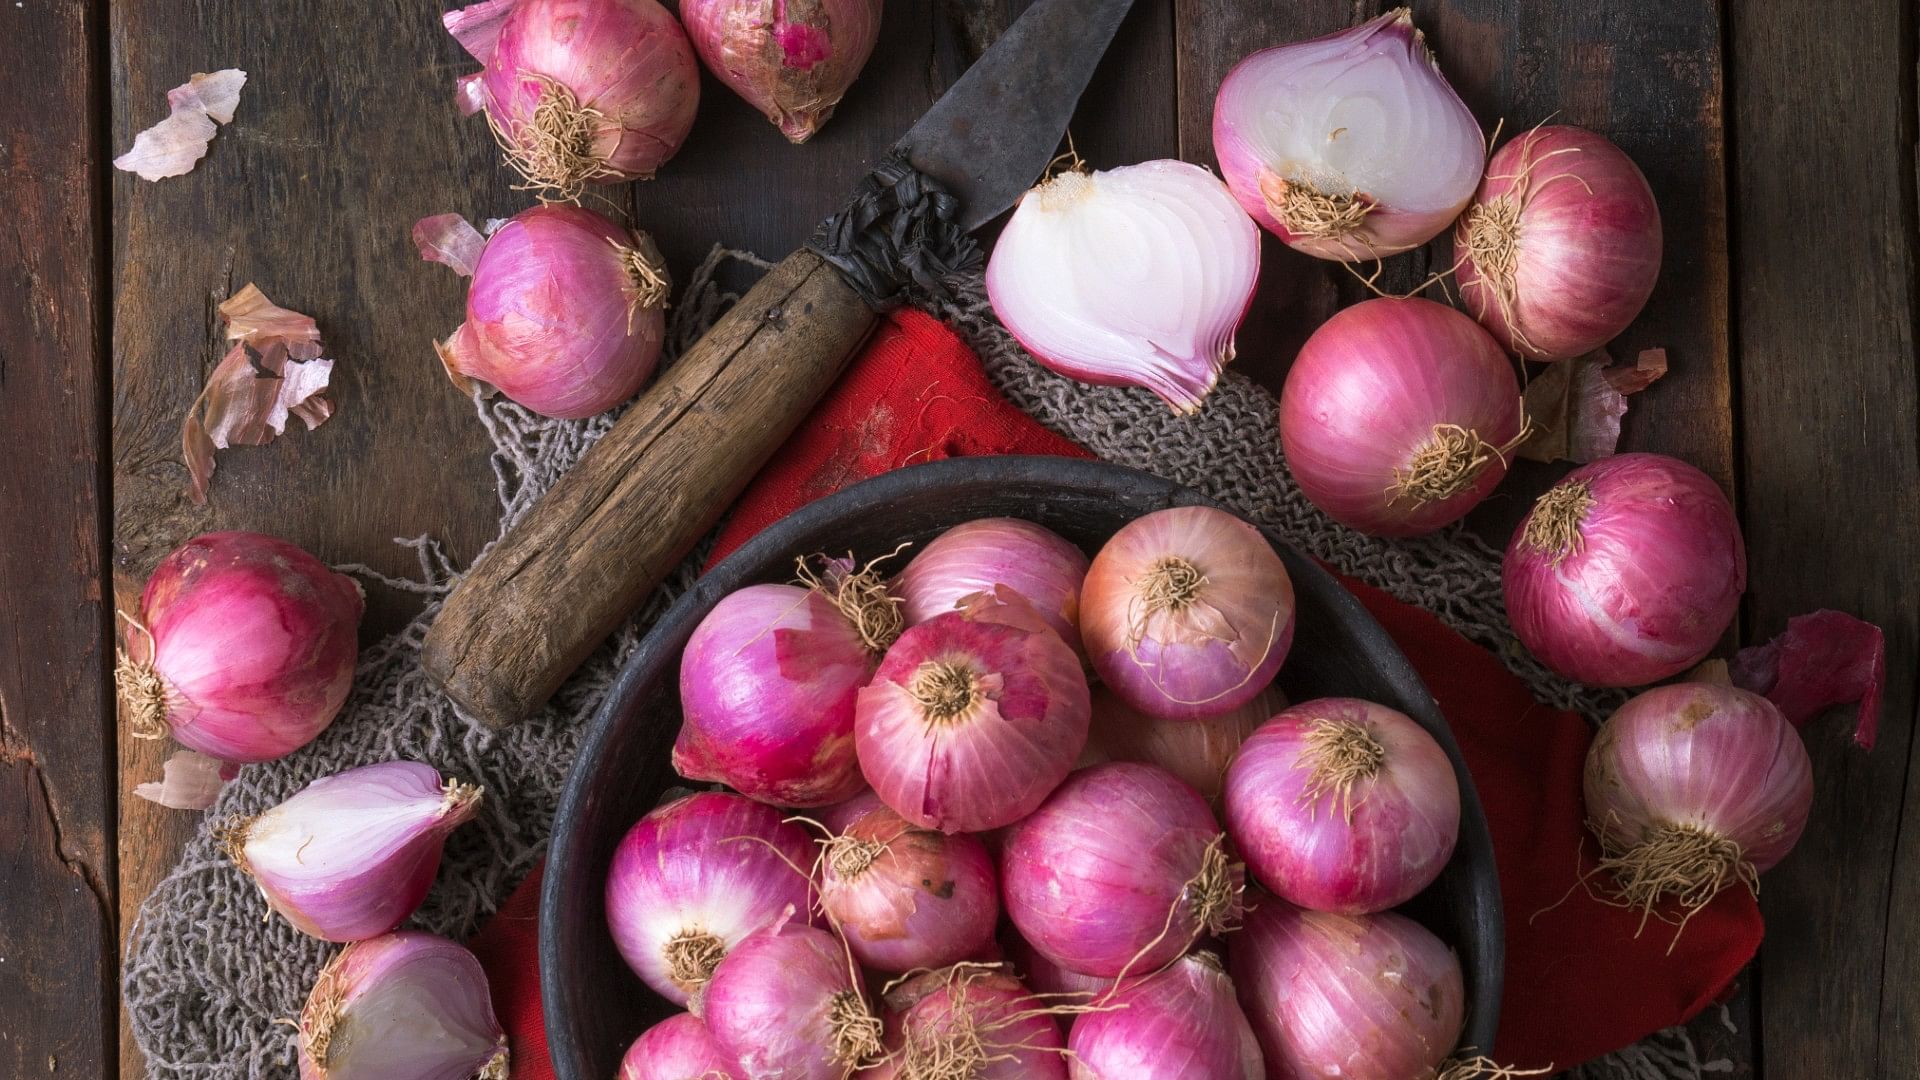 Benefits Of Onion With Vinegar Know The Best Way To Eat Onion in Hindi